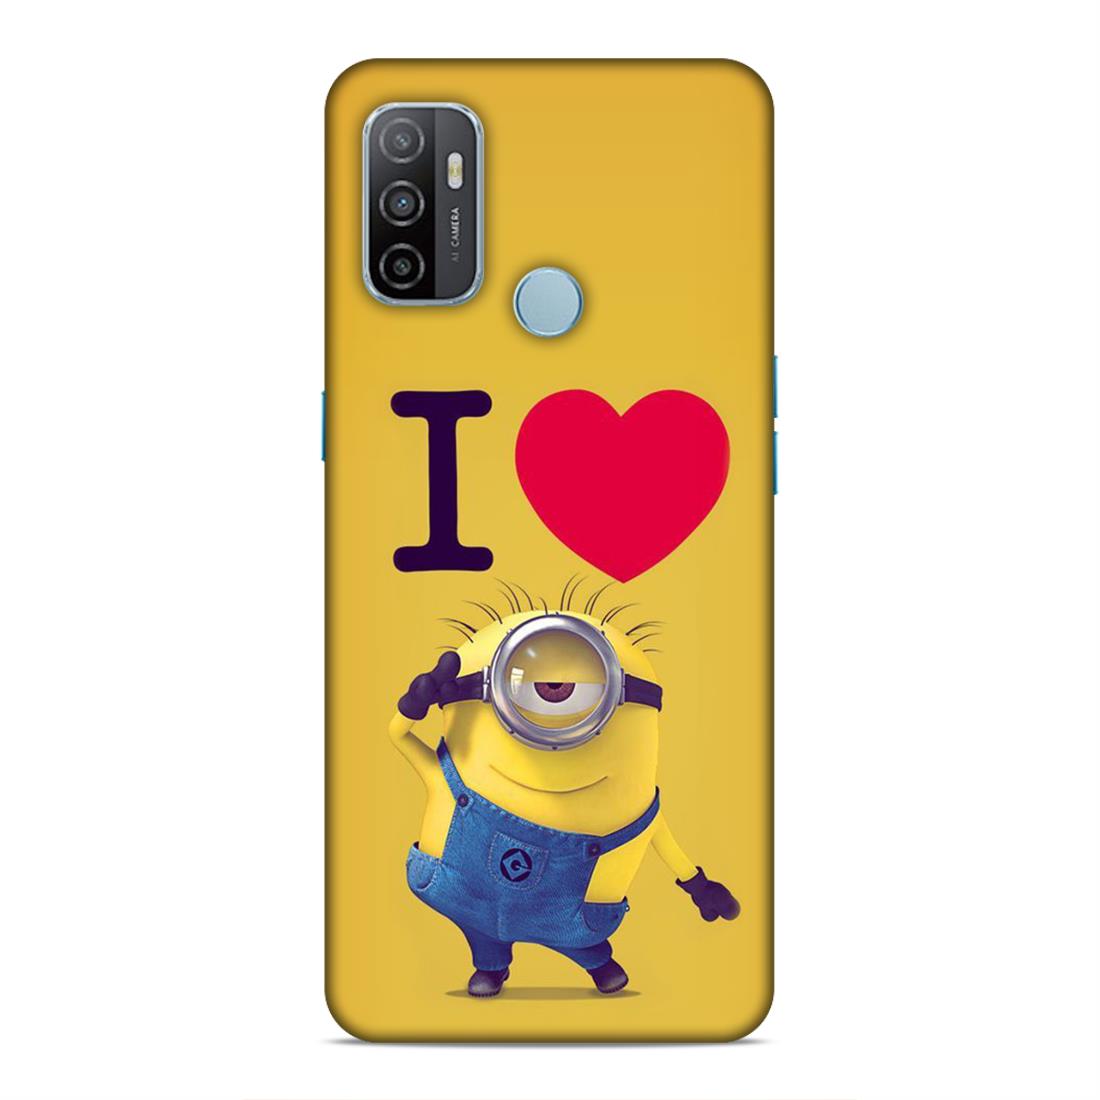 I love Minions Hard Back Case For Oppo A33 2020 / A53 2020